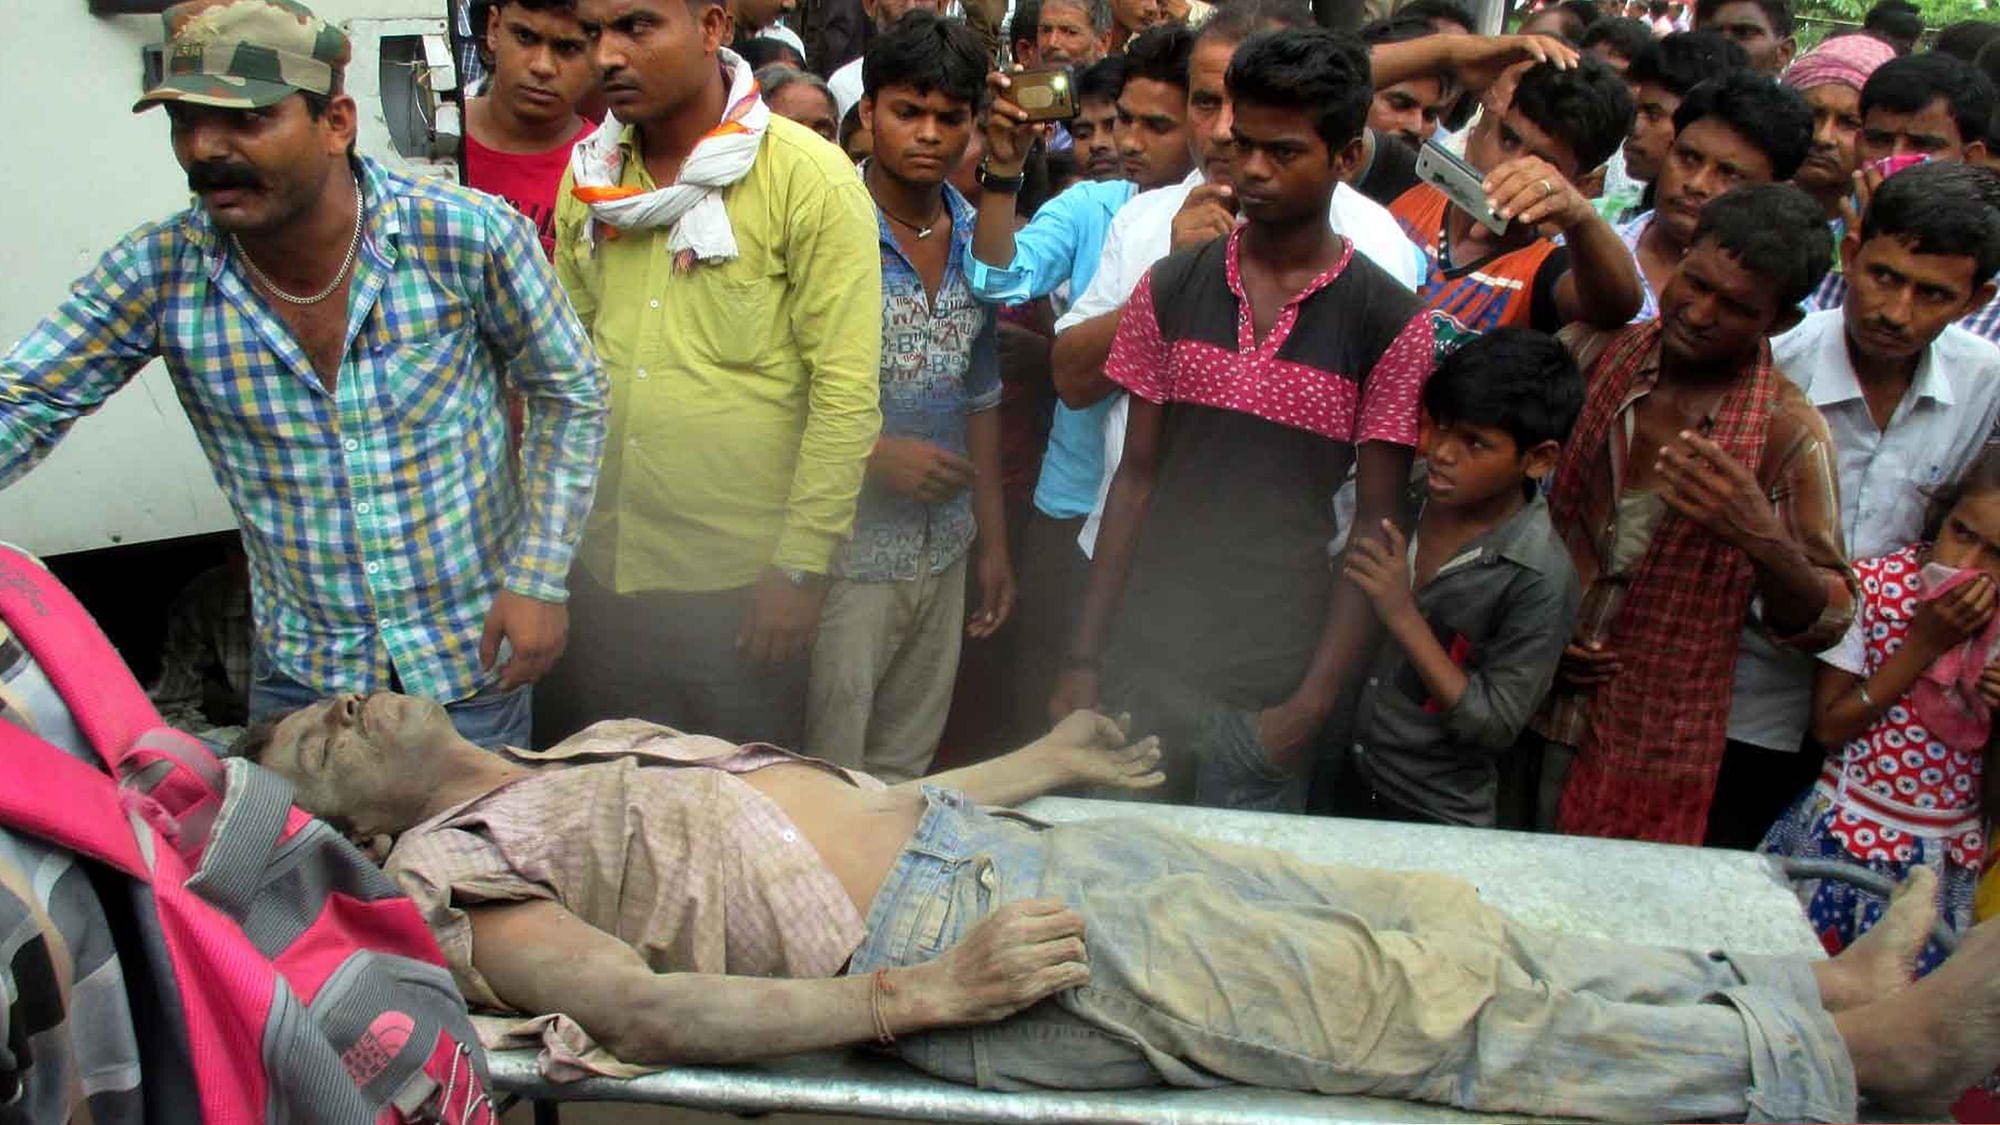 One of the victims of Gopalganj sudden deaths being taken away on 17 August 2016. At least 11 people died overnight under mysterious circumstances in Gopalganj district of Bihar. (Photo: IANS)